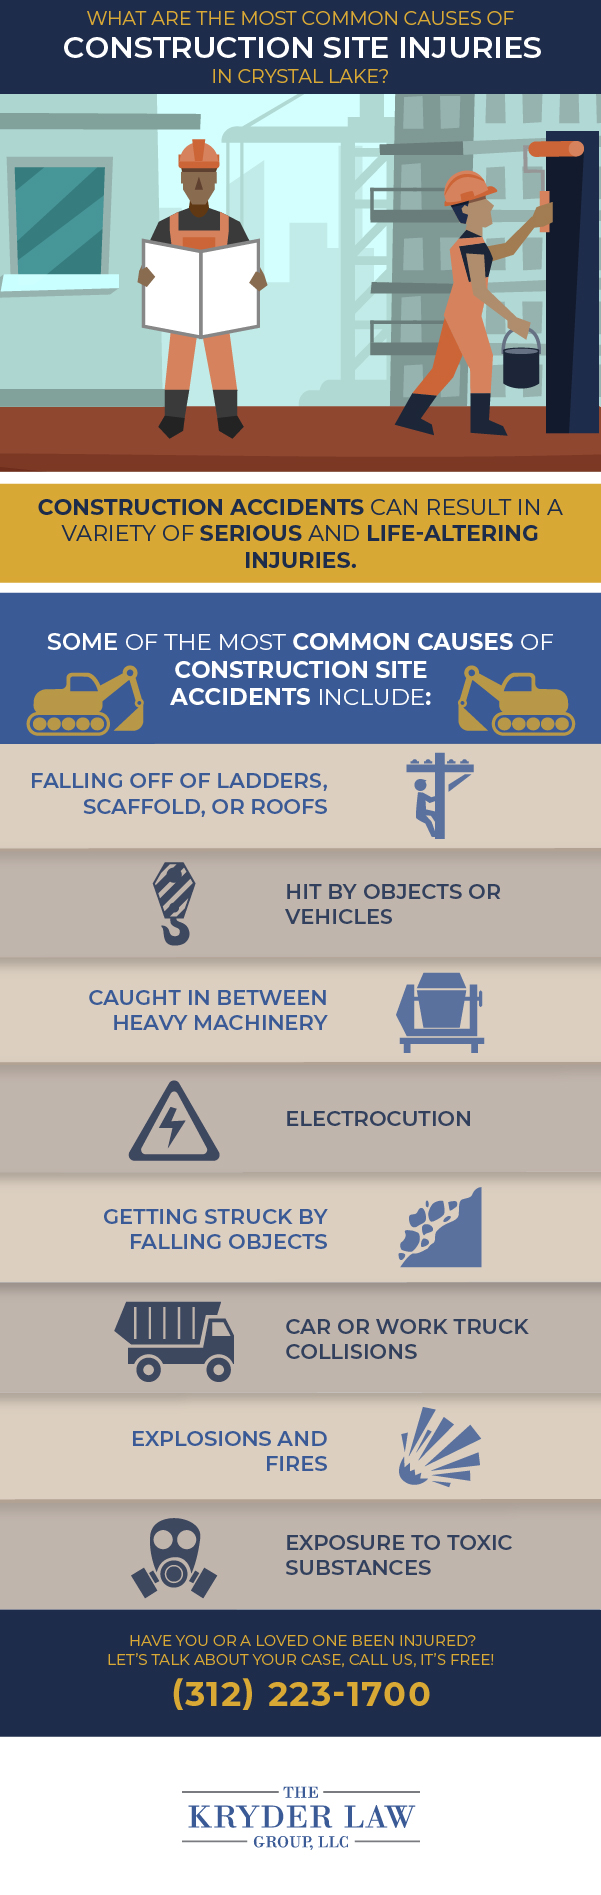 The Benefits of Hiring a Crystal Lake Construction Accident Lawyer Infographic